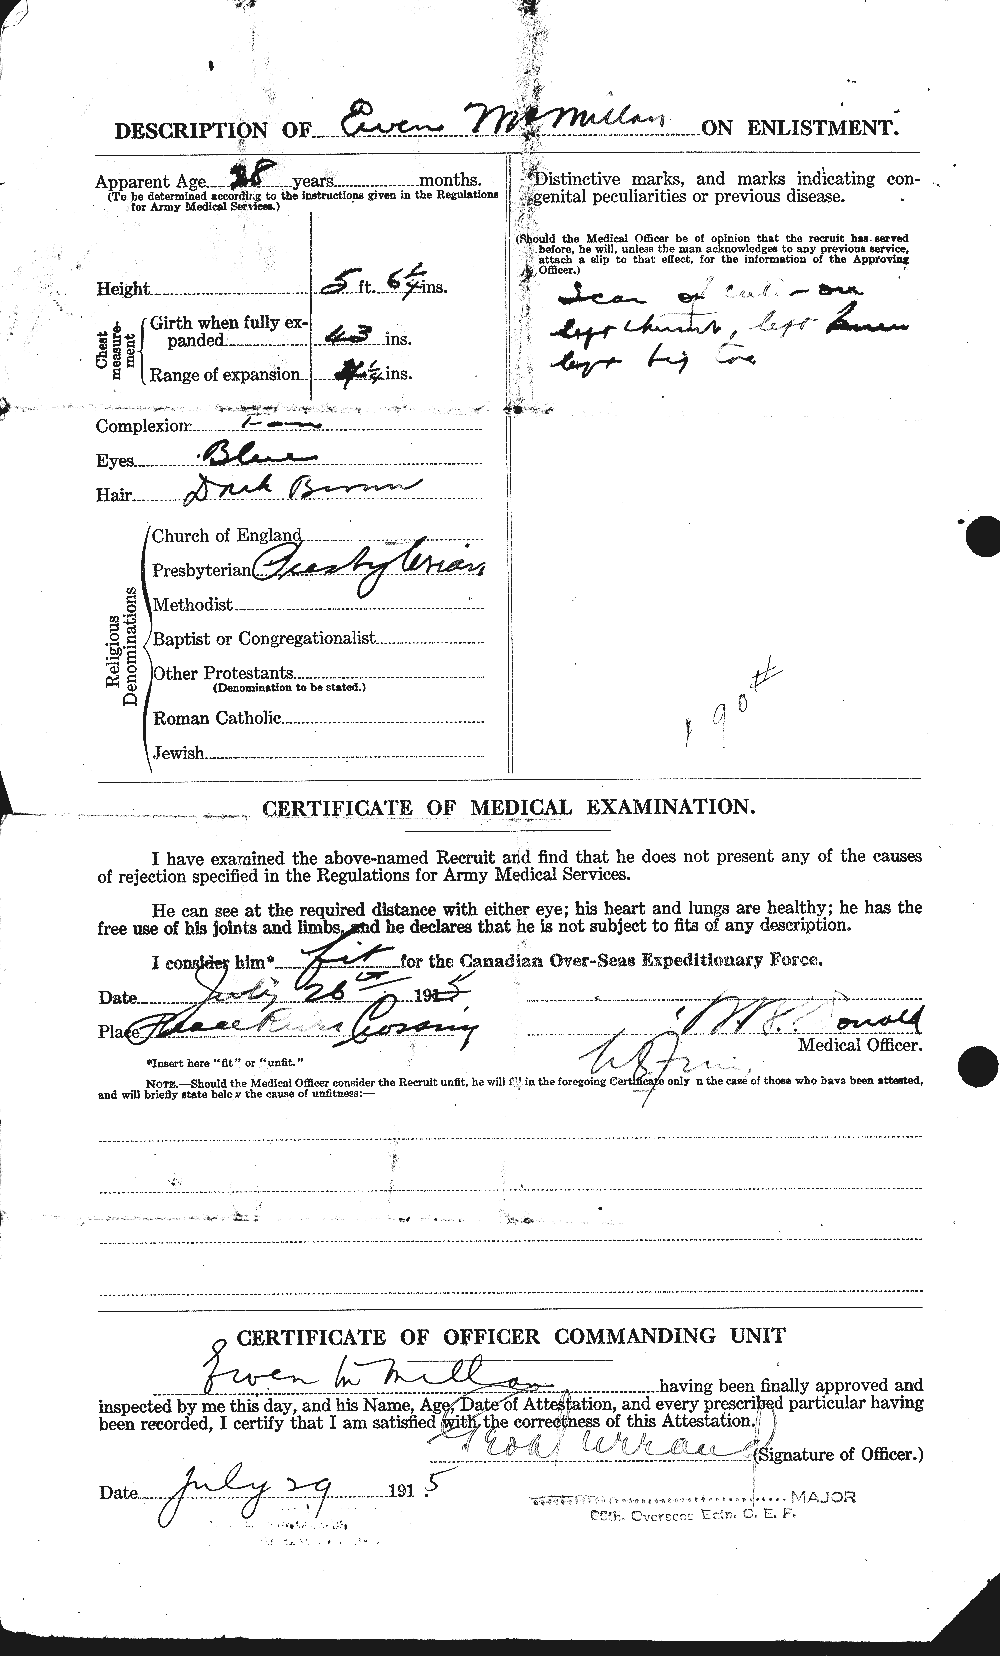 Personnel Records of the First World War - CEF 537687b